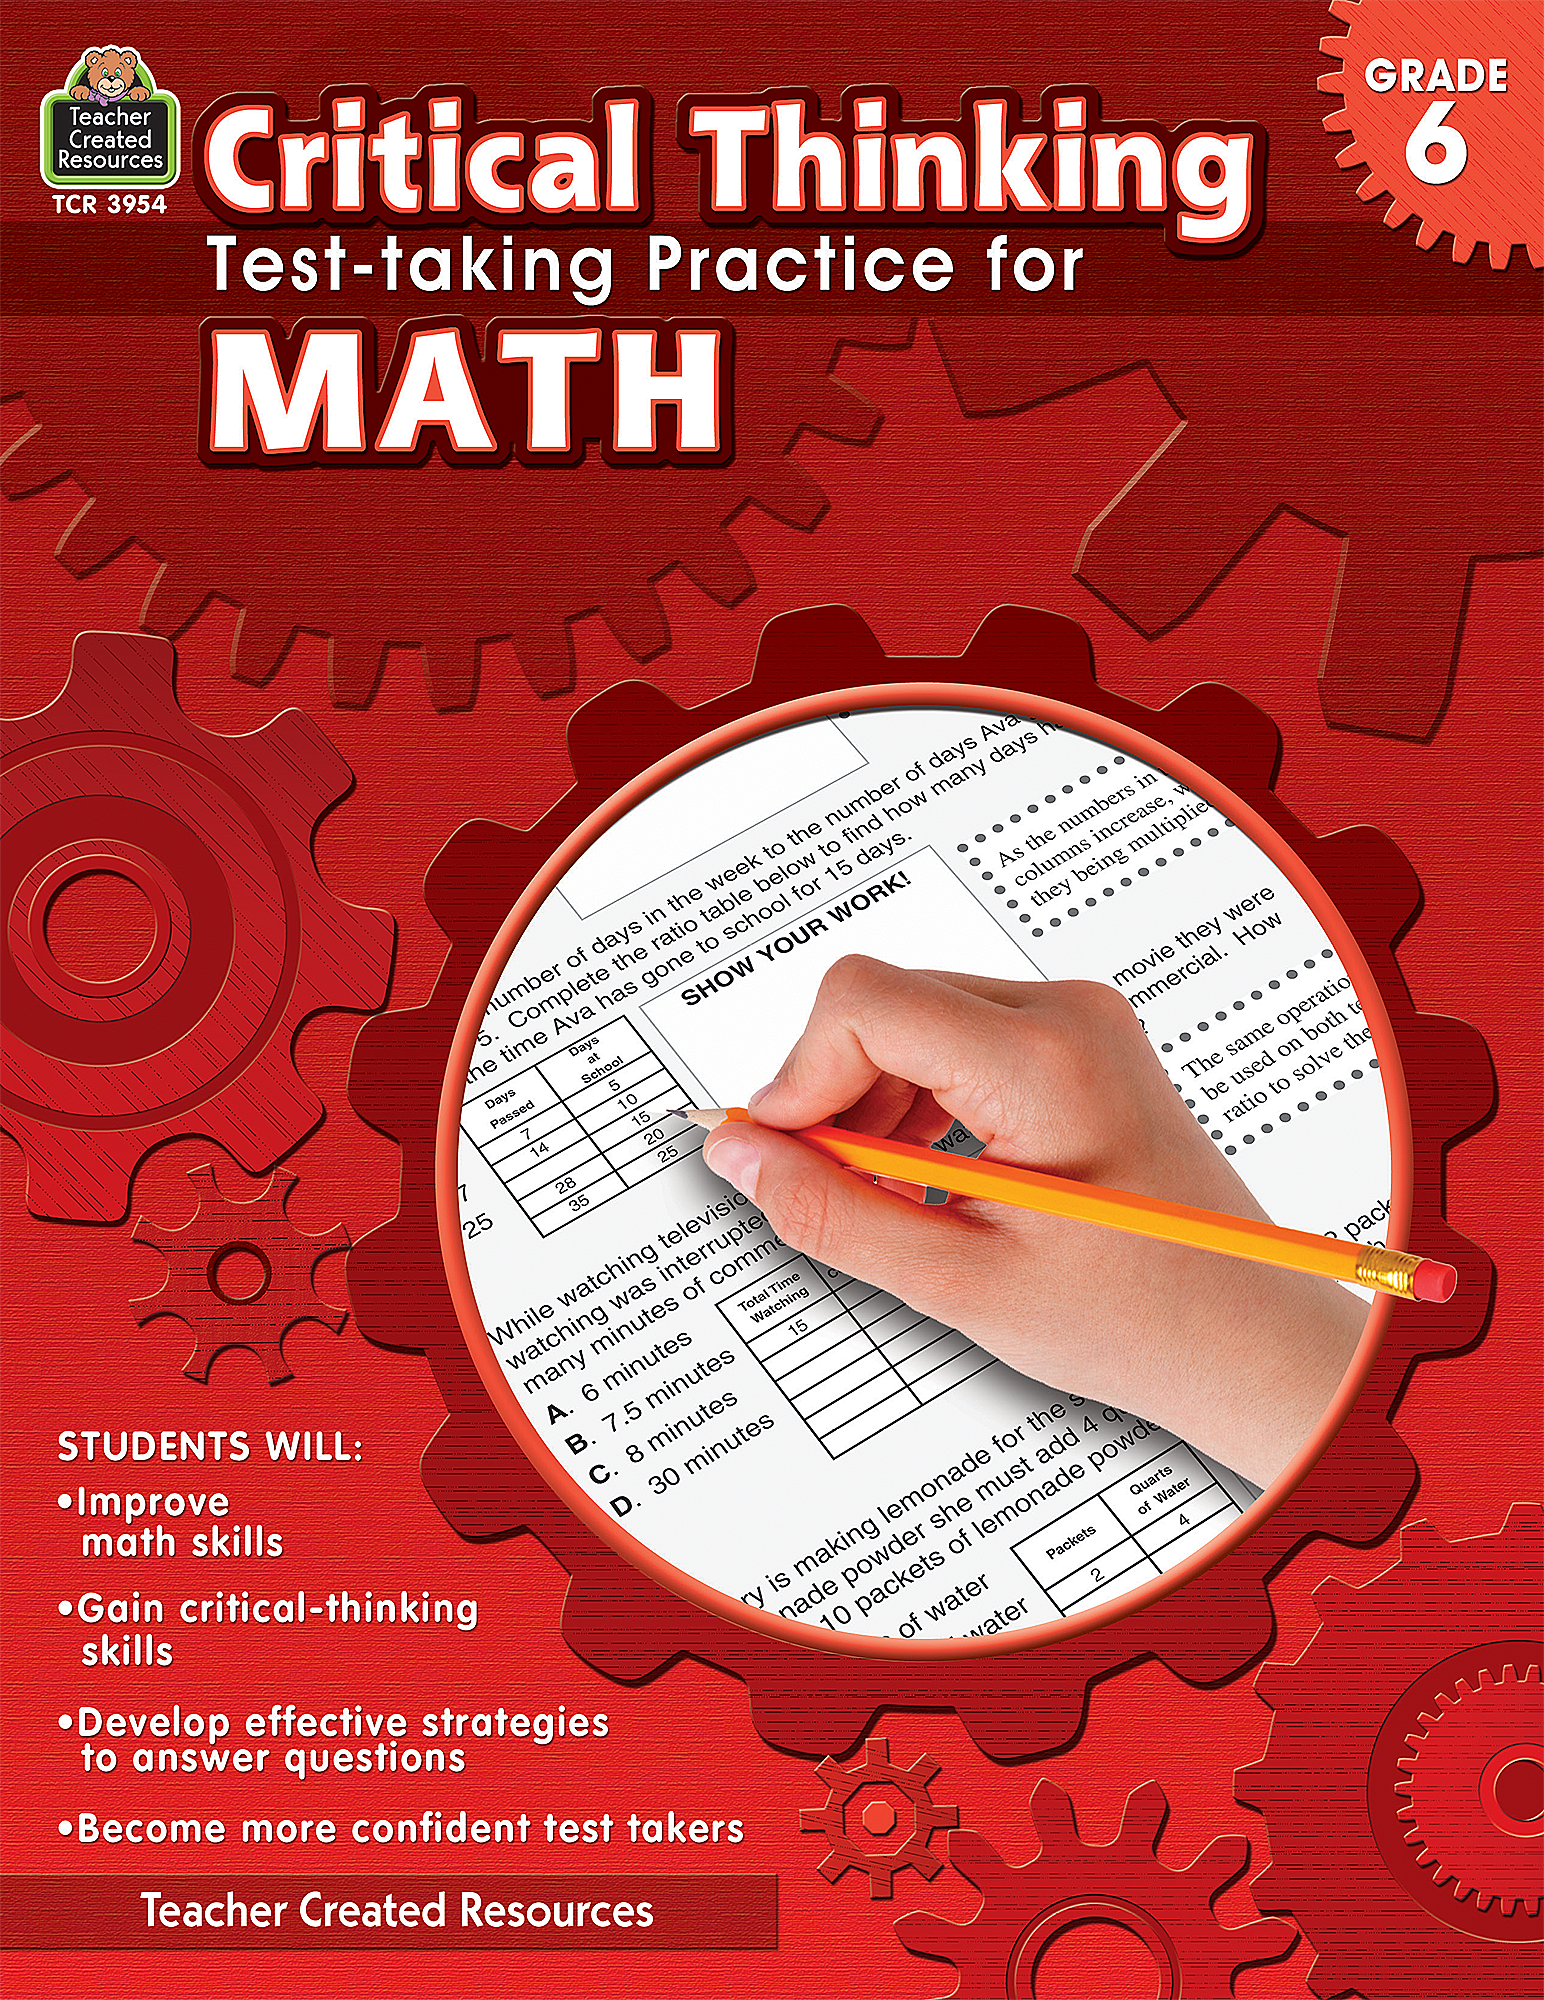 critical-thinking-test-taking-practice-for-math-grade-6-tcr3954-teacher-created-resources